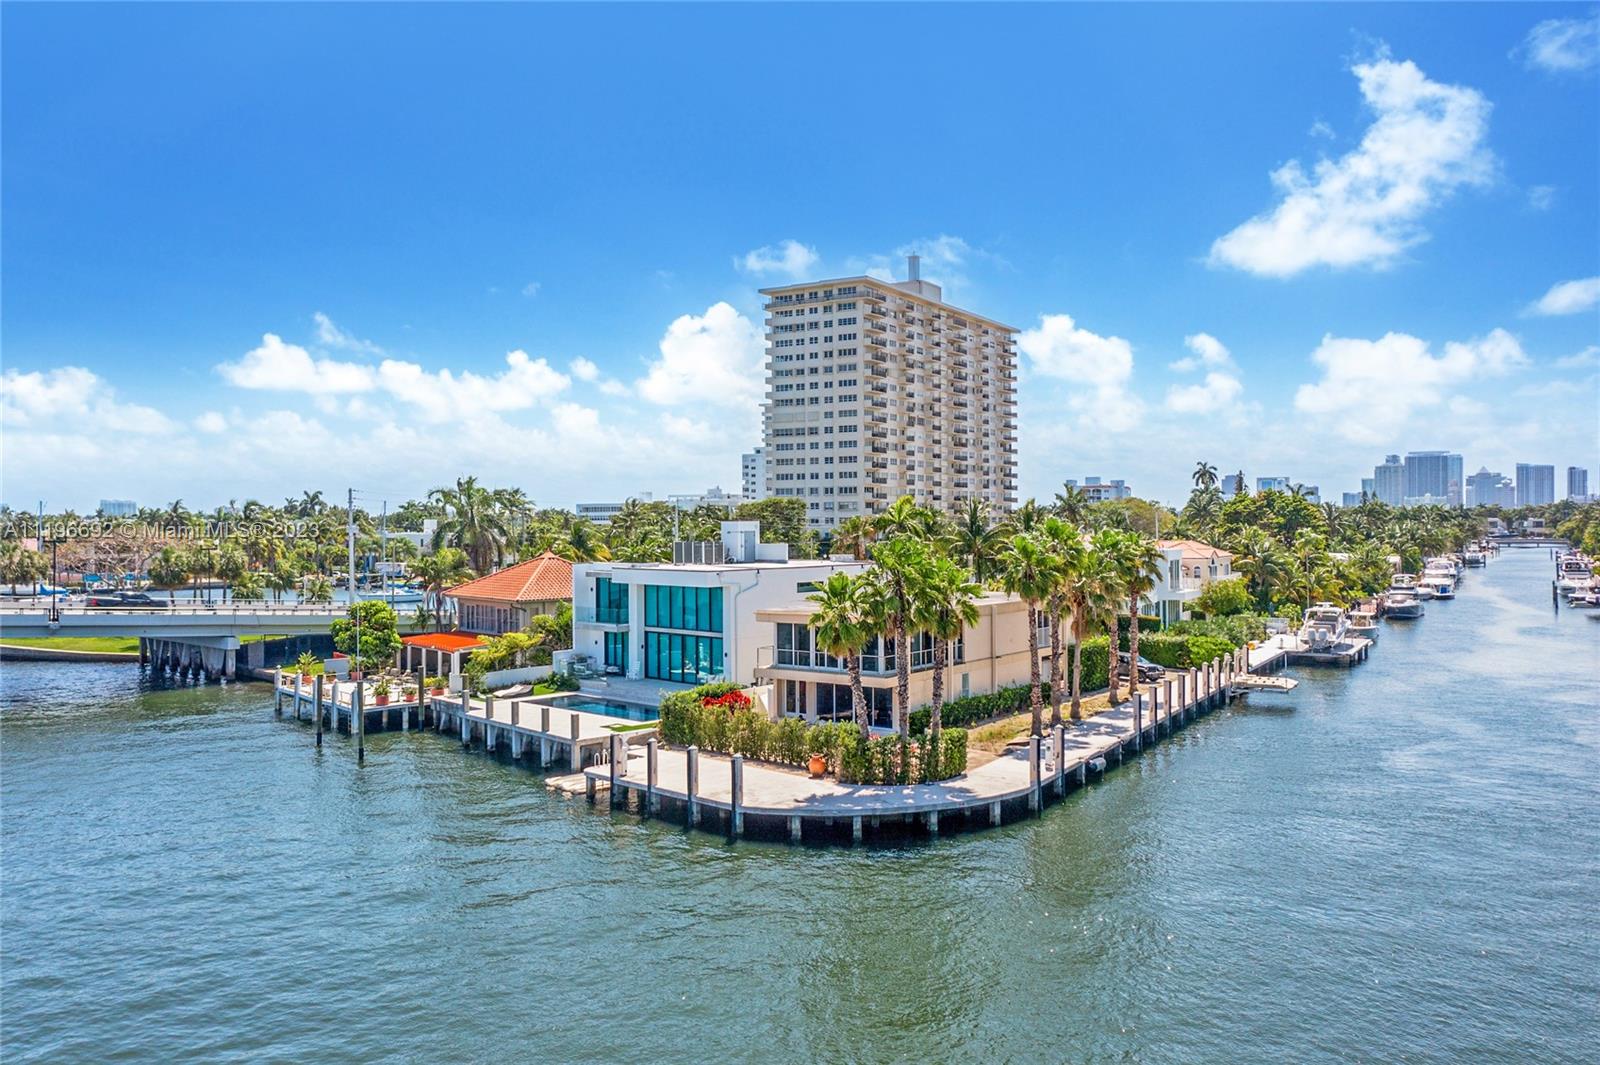 Rare and one of a kind point lot is within close proximity to Fort Lauderdale's famous Las Olas Boulevard and Fort Lauderdale Beach. Approximate lot size is 60 x 170'.  Dock your mega yacht on the side of the house and still have a spectacular Intracoastal view. Enjoy deepwater ocean access and just minutes to Port Everglades Inlet. Existing home is ready for you to complete with your personal touch or build to suit - some photos are virtually staged.  Master bedroom suite on main level with direct access to patio and spectacular water views. Watch the yachts go by from the second floor living room with floor to ceiling impact glass and 180 degree views of the Intracostal. Close proximity to shopping, dining, downtown, airport, Brightline & all major roads.